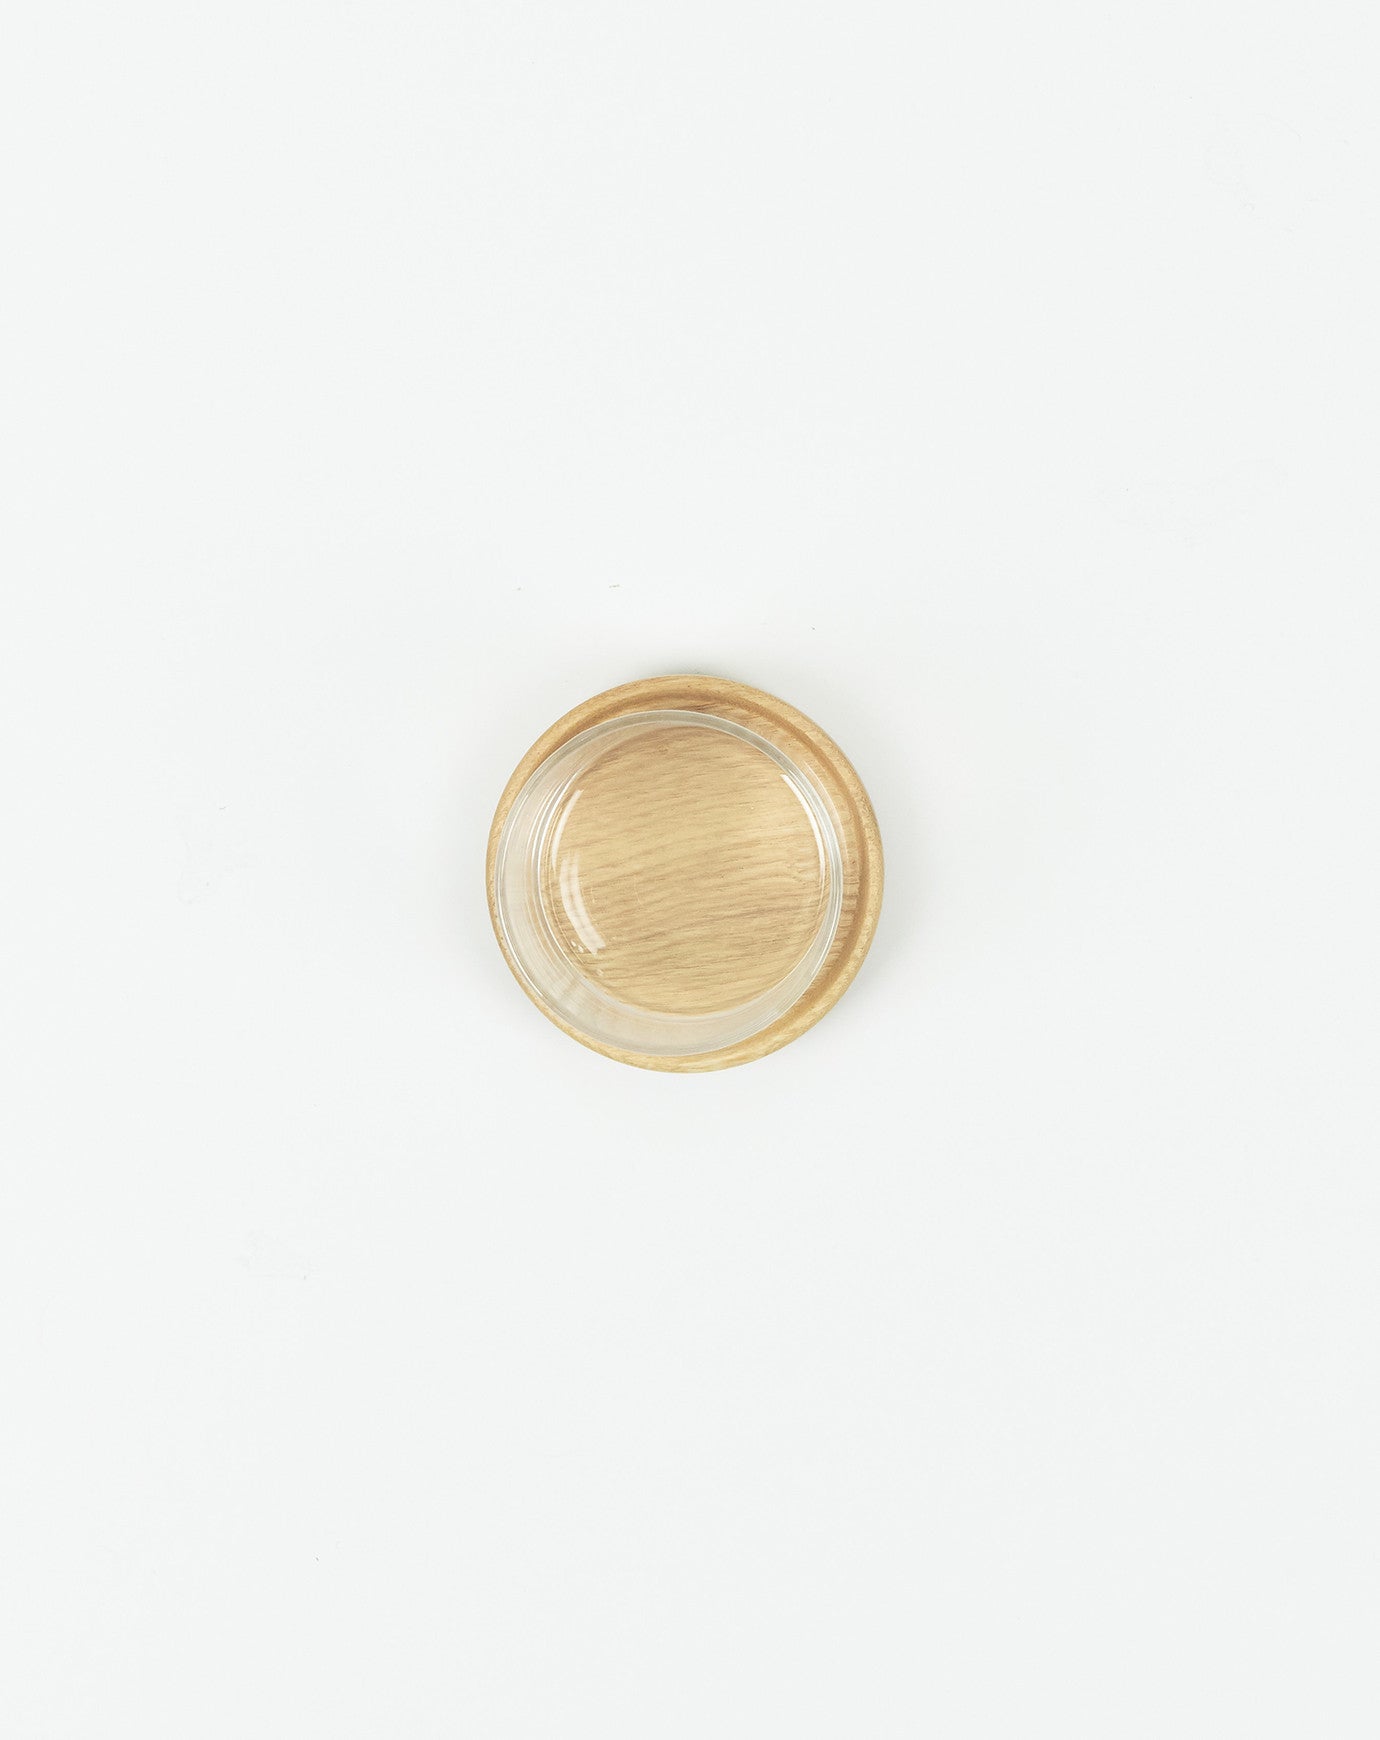 Hasami Porcelain Small Tray in Ash